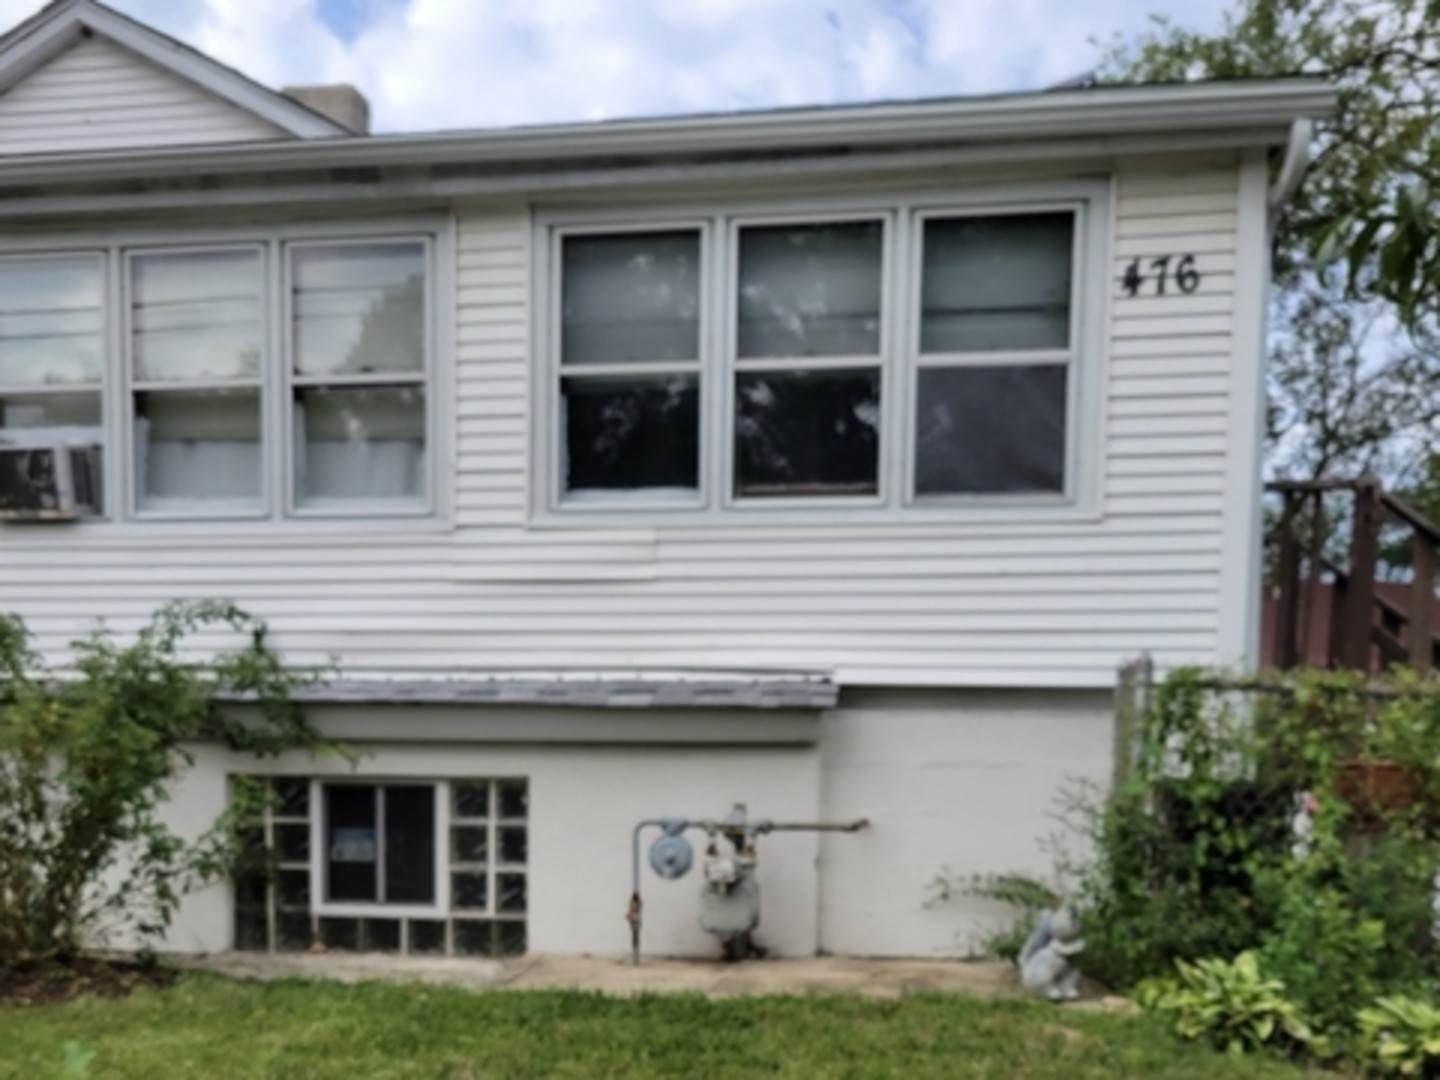 2. Single Family for Sale at Elgin, IL 60120